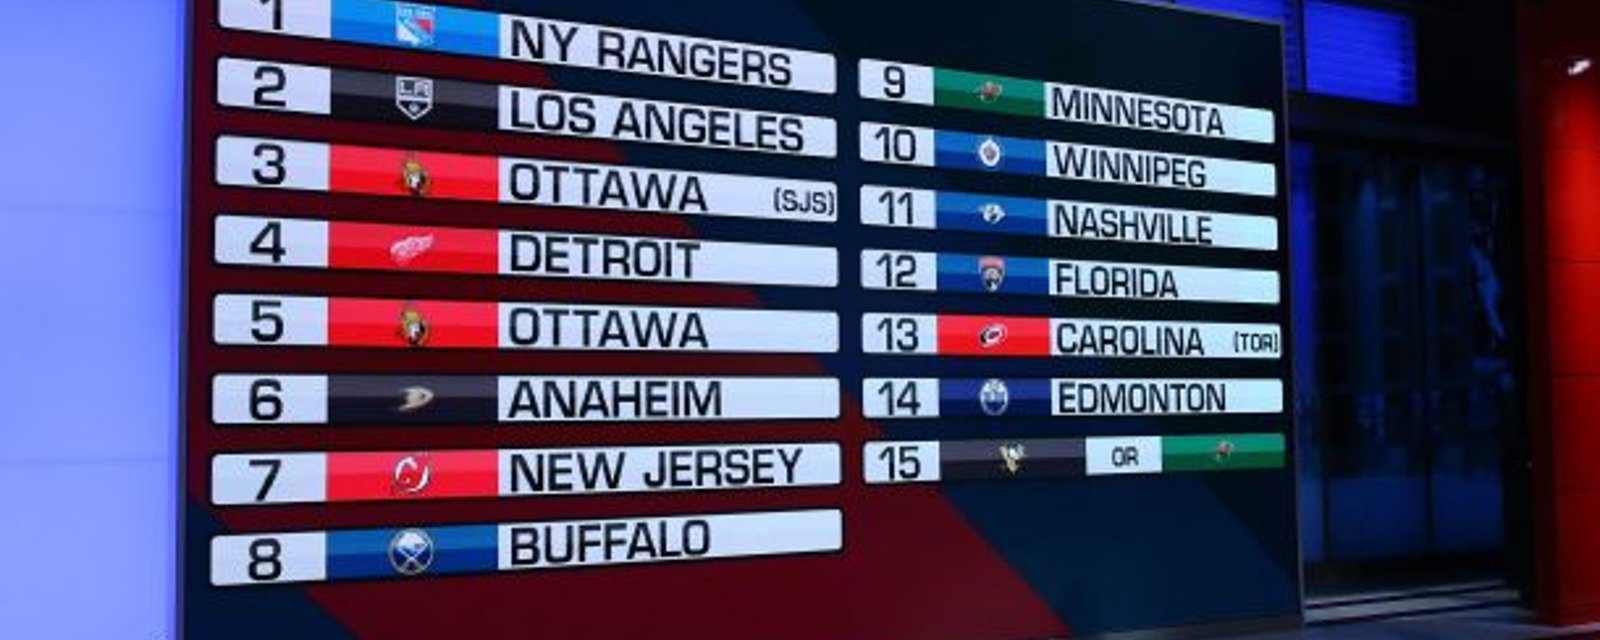 More trades to go down at the NHL draft than in a typical year!